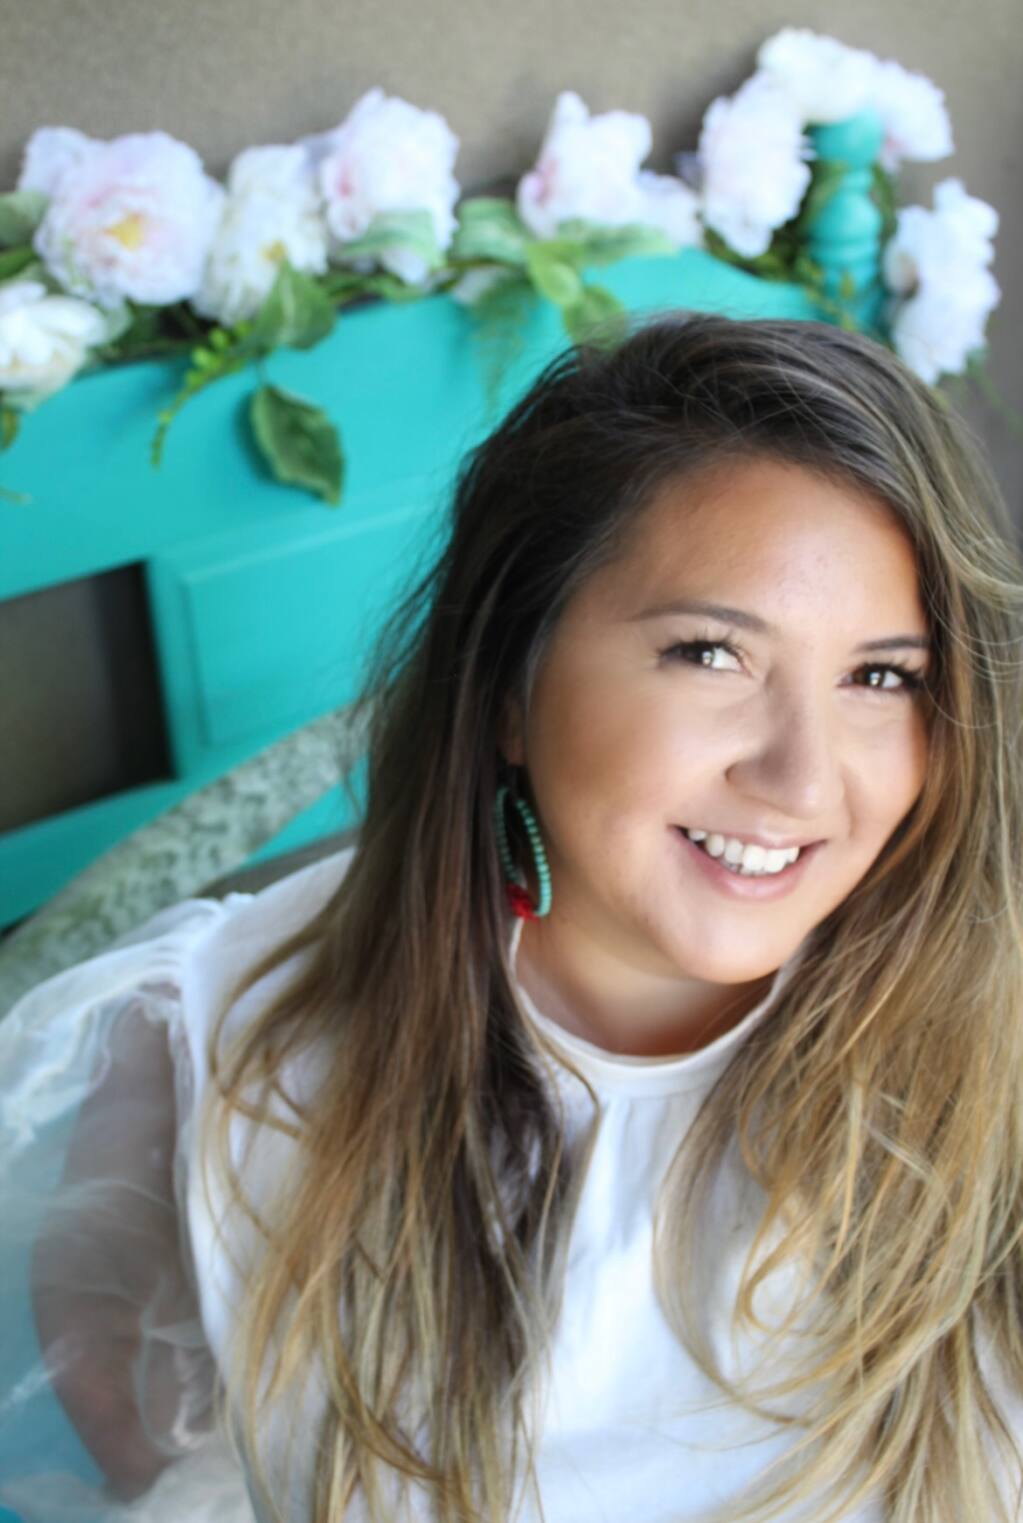 Angie Sanchez, 34, founder and executive director of VIDA, is a 2022 North Bay Business Journal Forty Under 40 Award winner. The winners will be recognized at a Tuesday, April 19 event from 4 to 6:30 p.m. at The Blue Ridge Kitchen at The Barlow in Sebastopol.